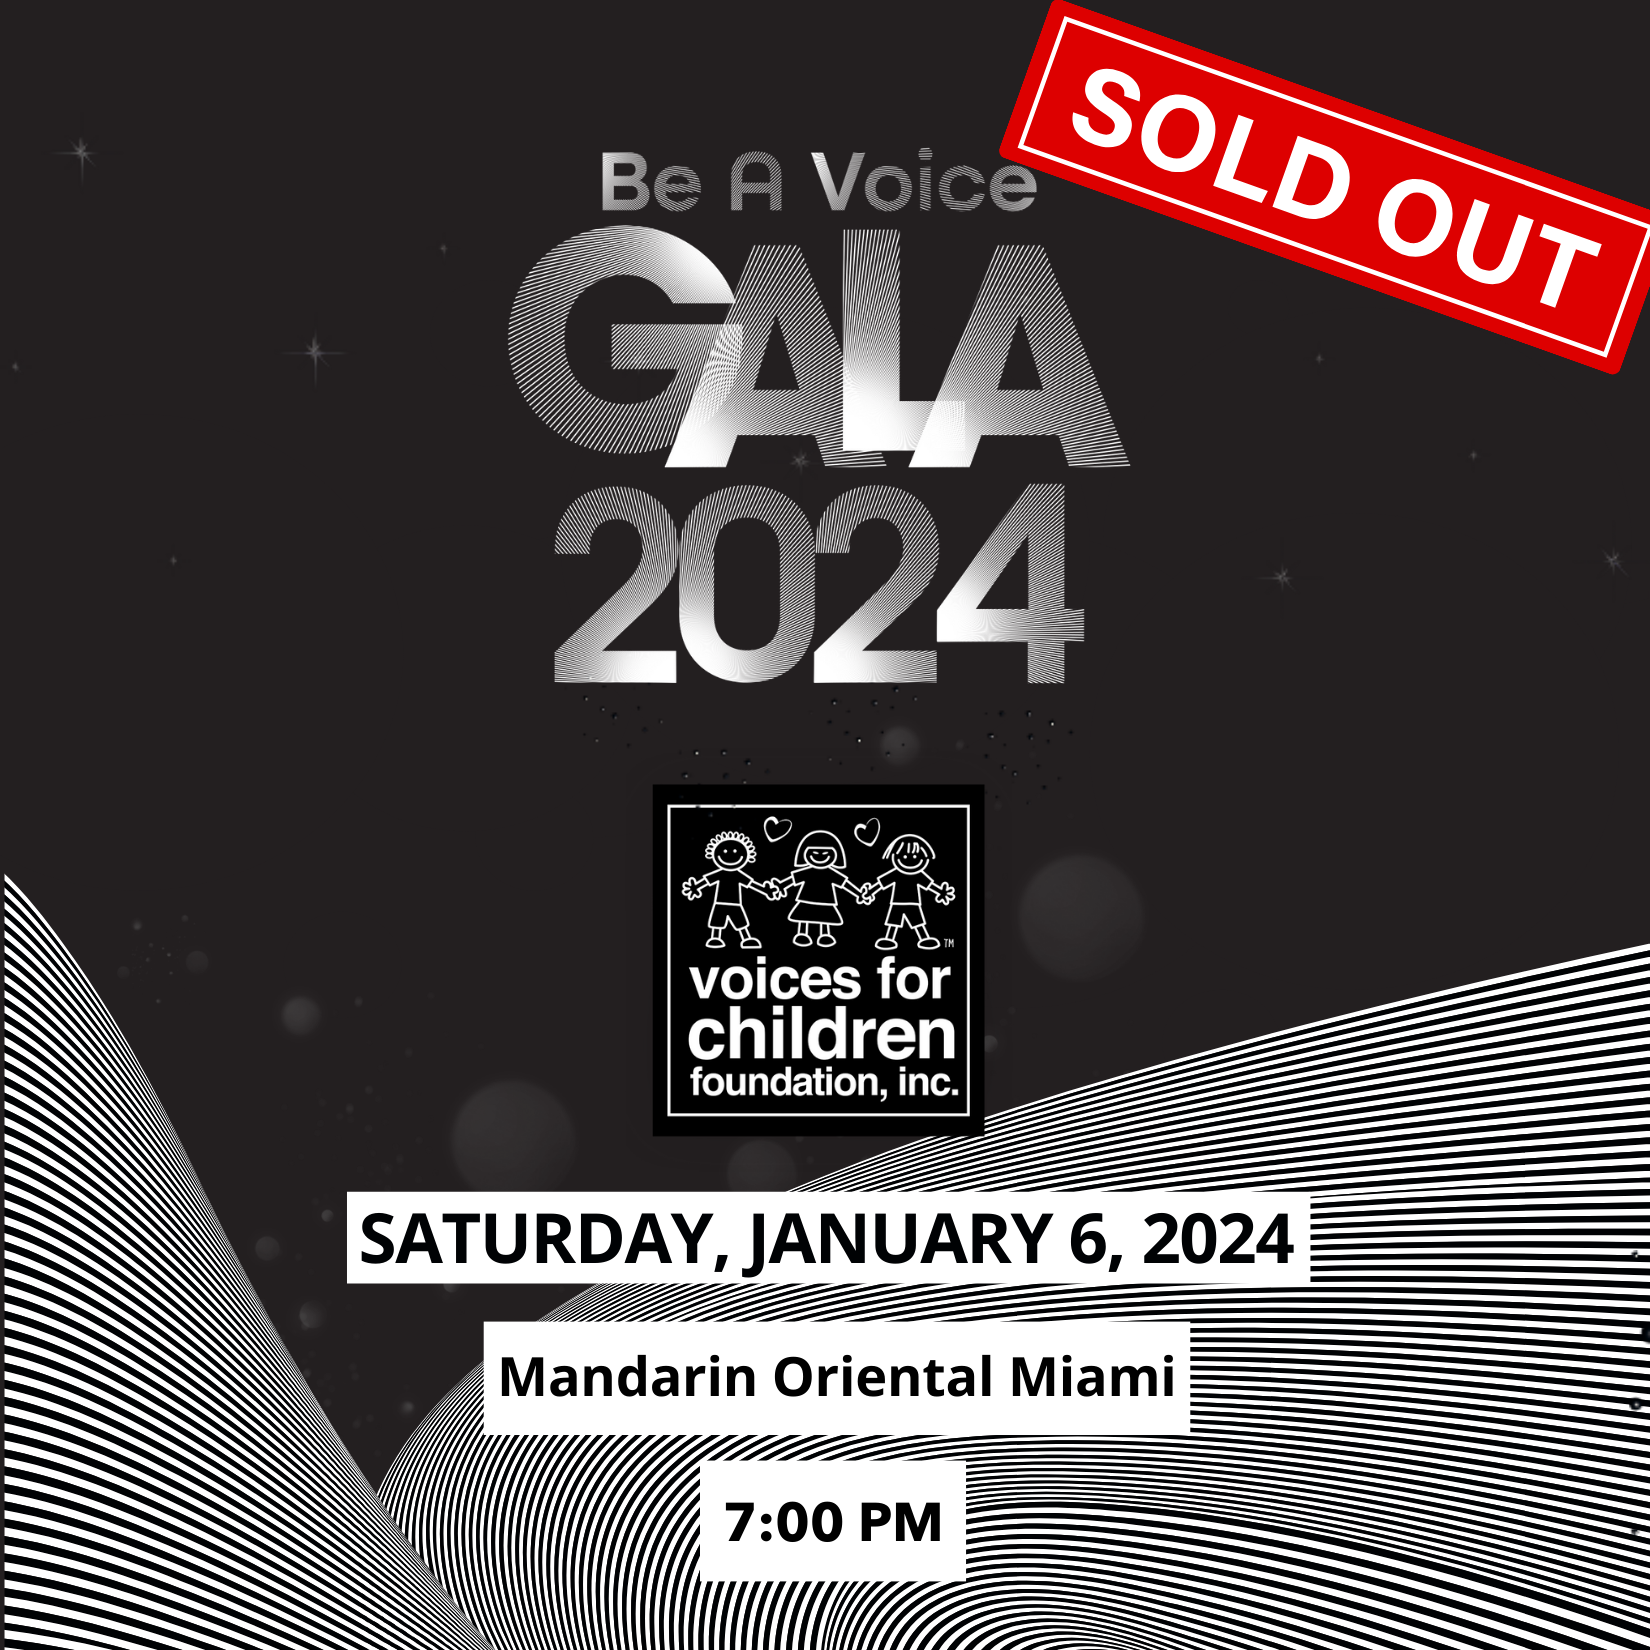 January 2024 Be A Voice Gala has sold out. 